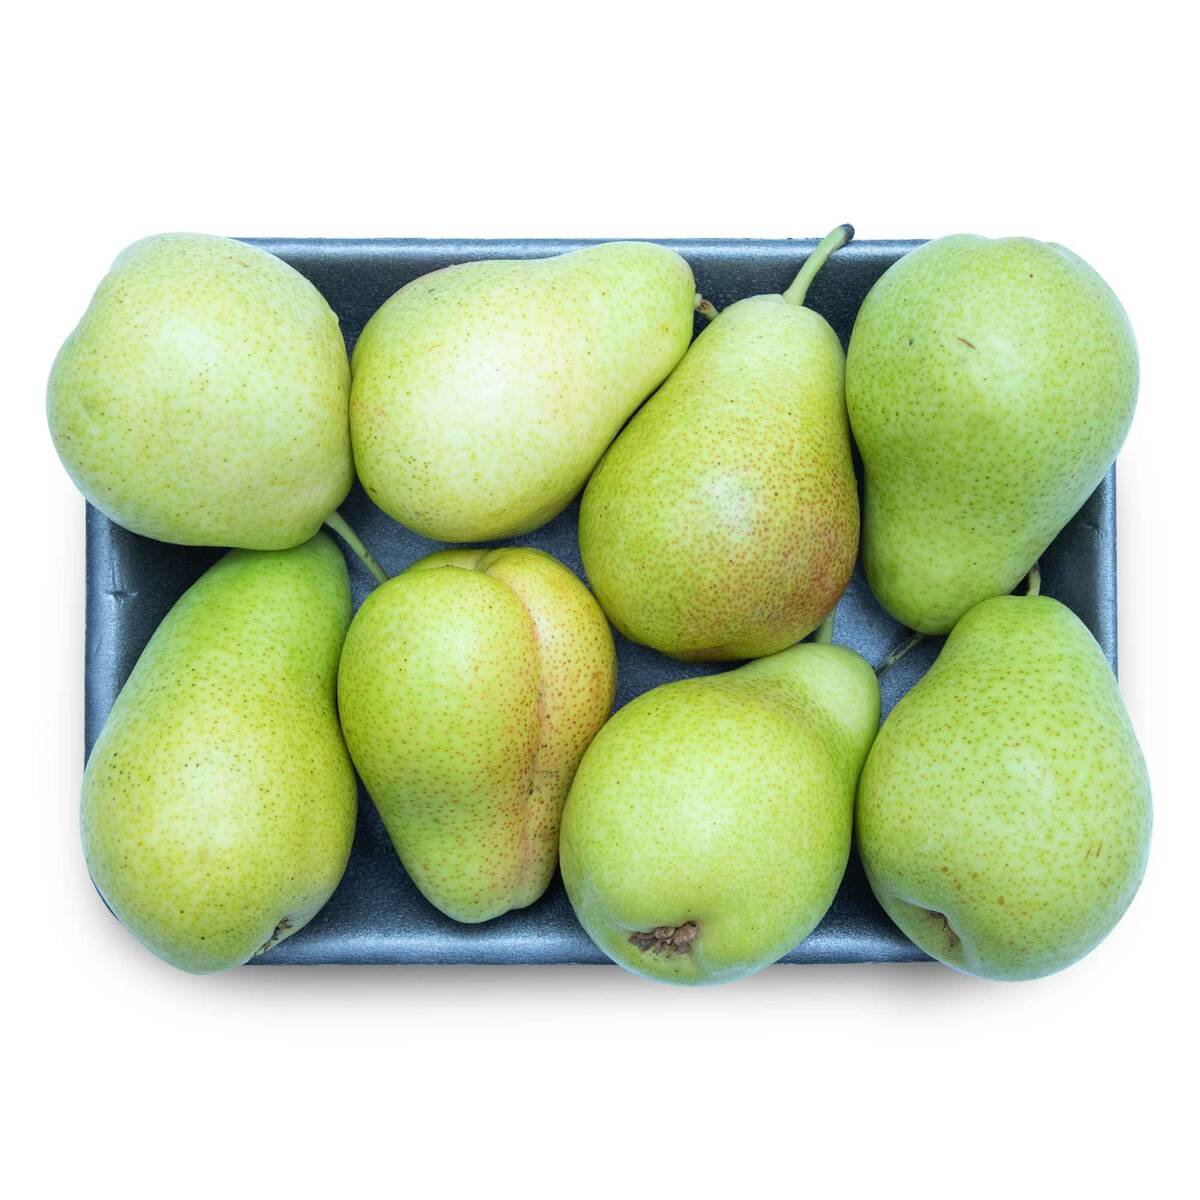 Vermonte Beauty Pears South Africa 8pcs